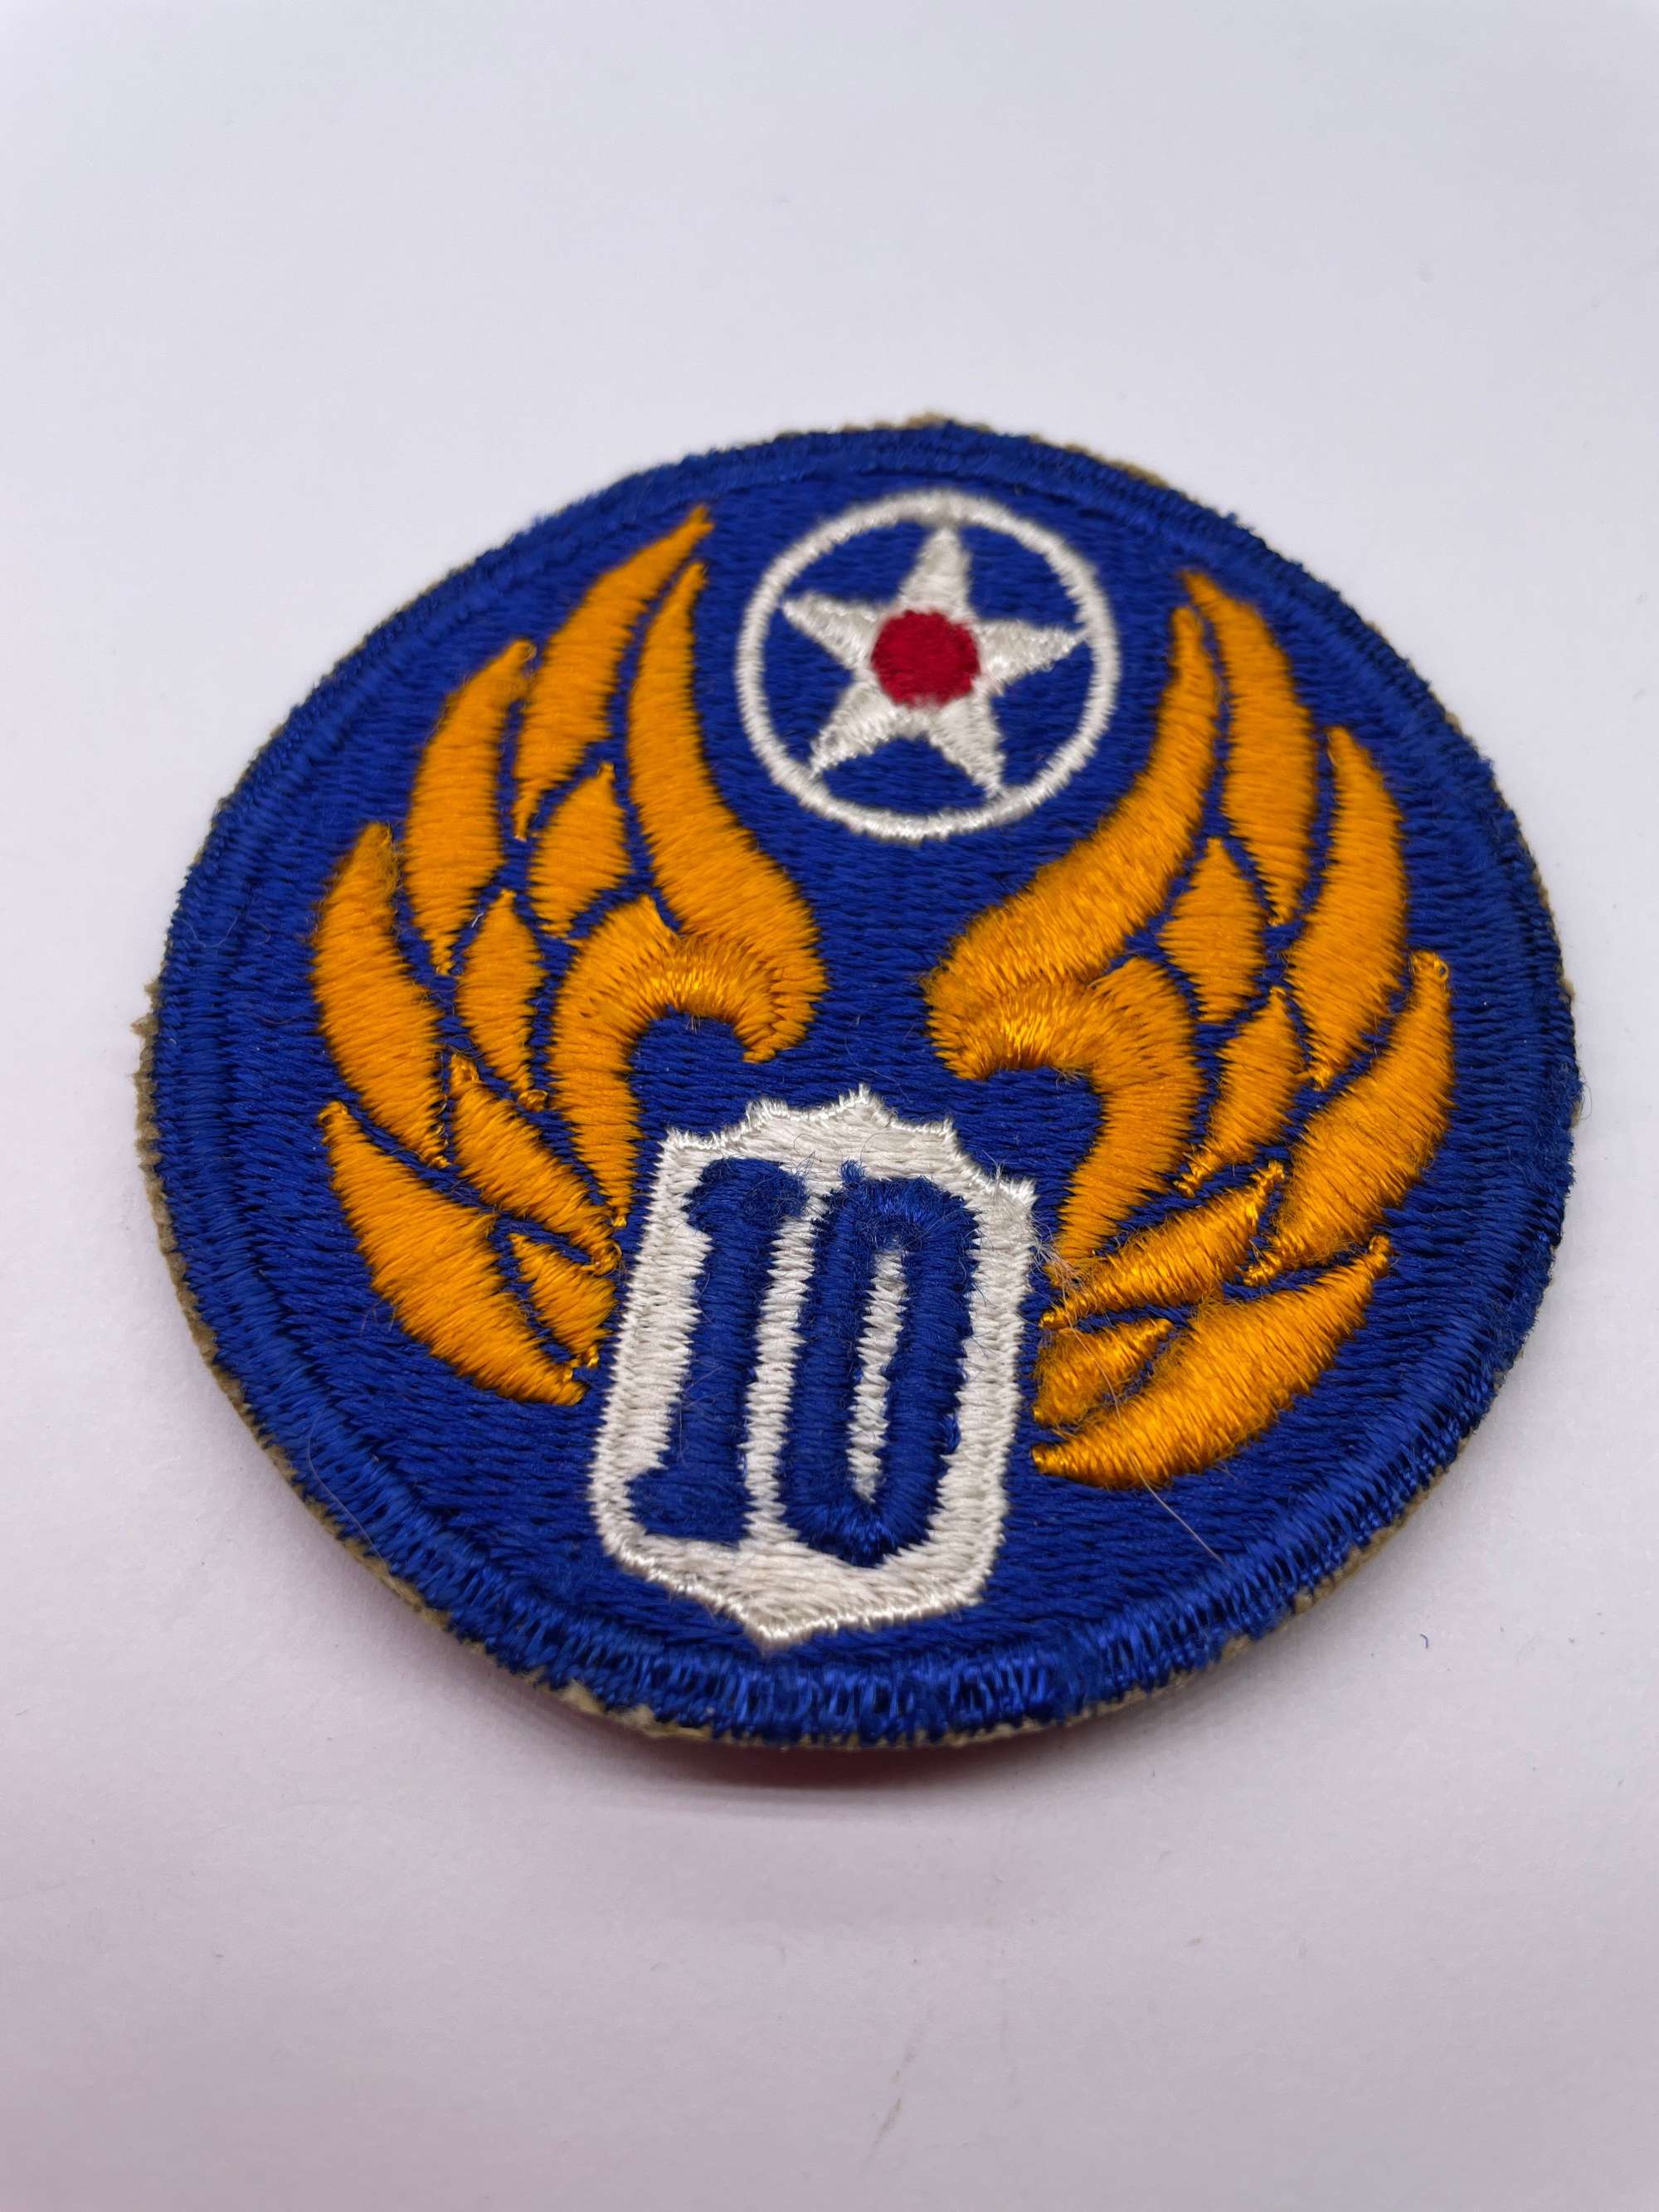 Original World War Two American 10th Army Air Force Patch